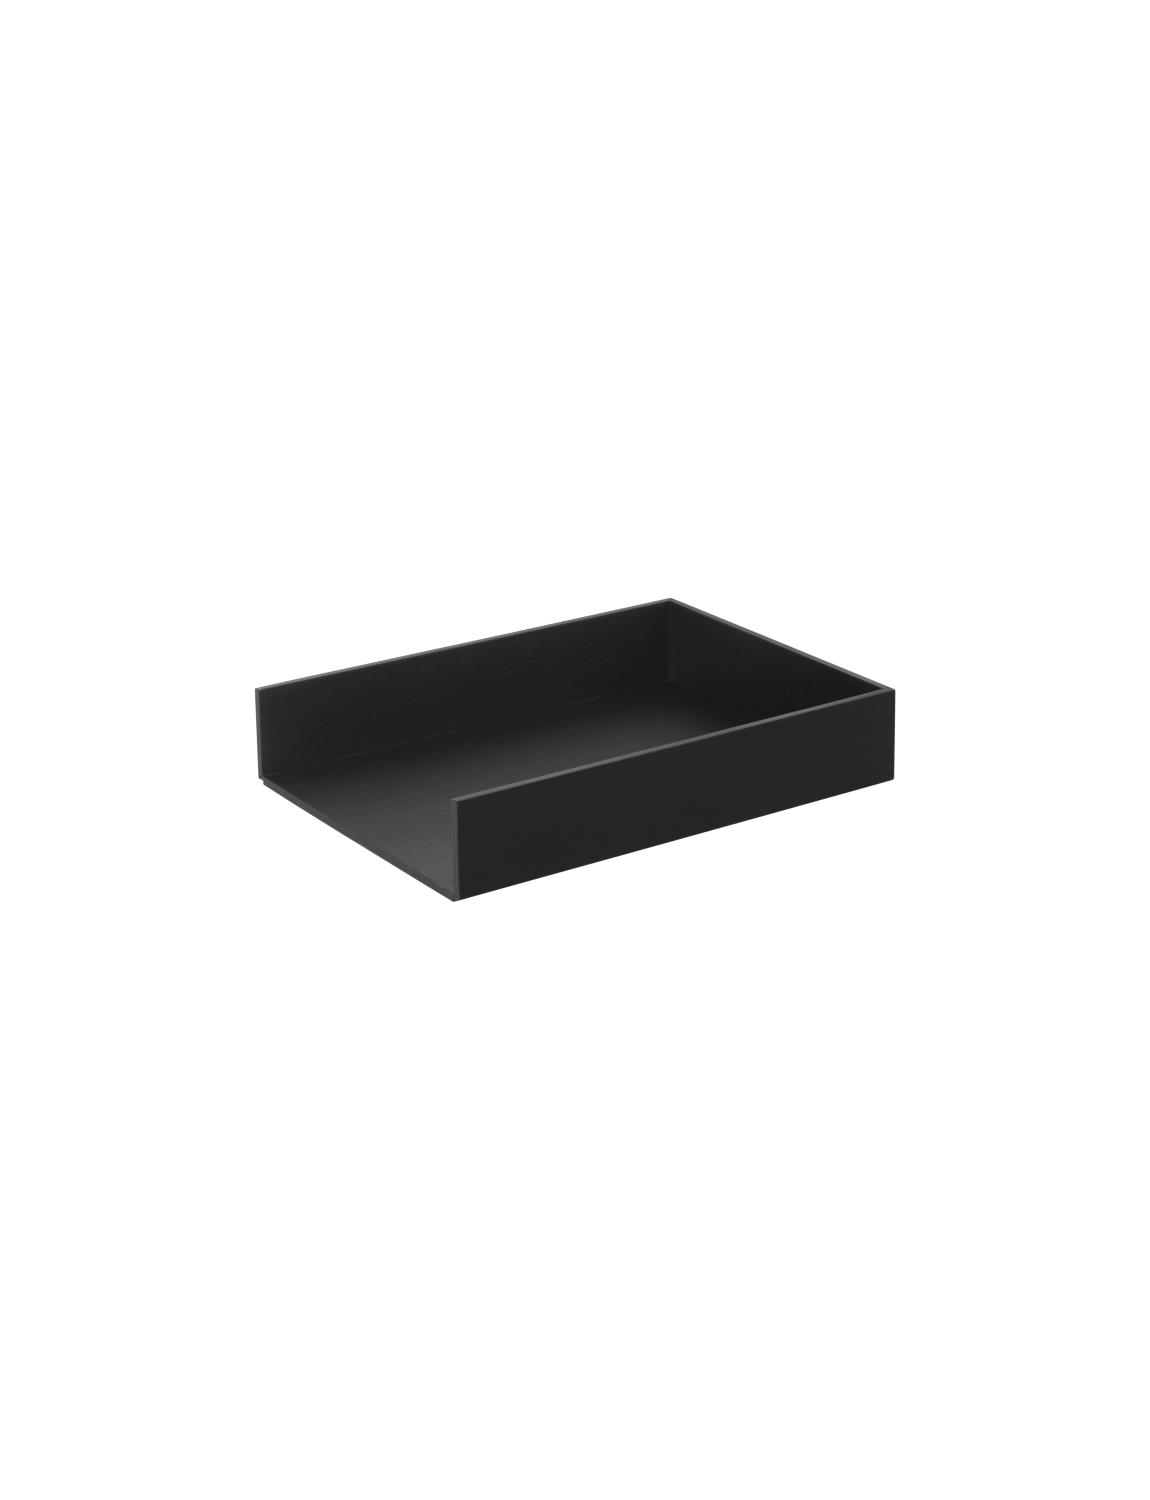 Ferm Living - Letter Tray - Black Stained Ash